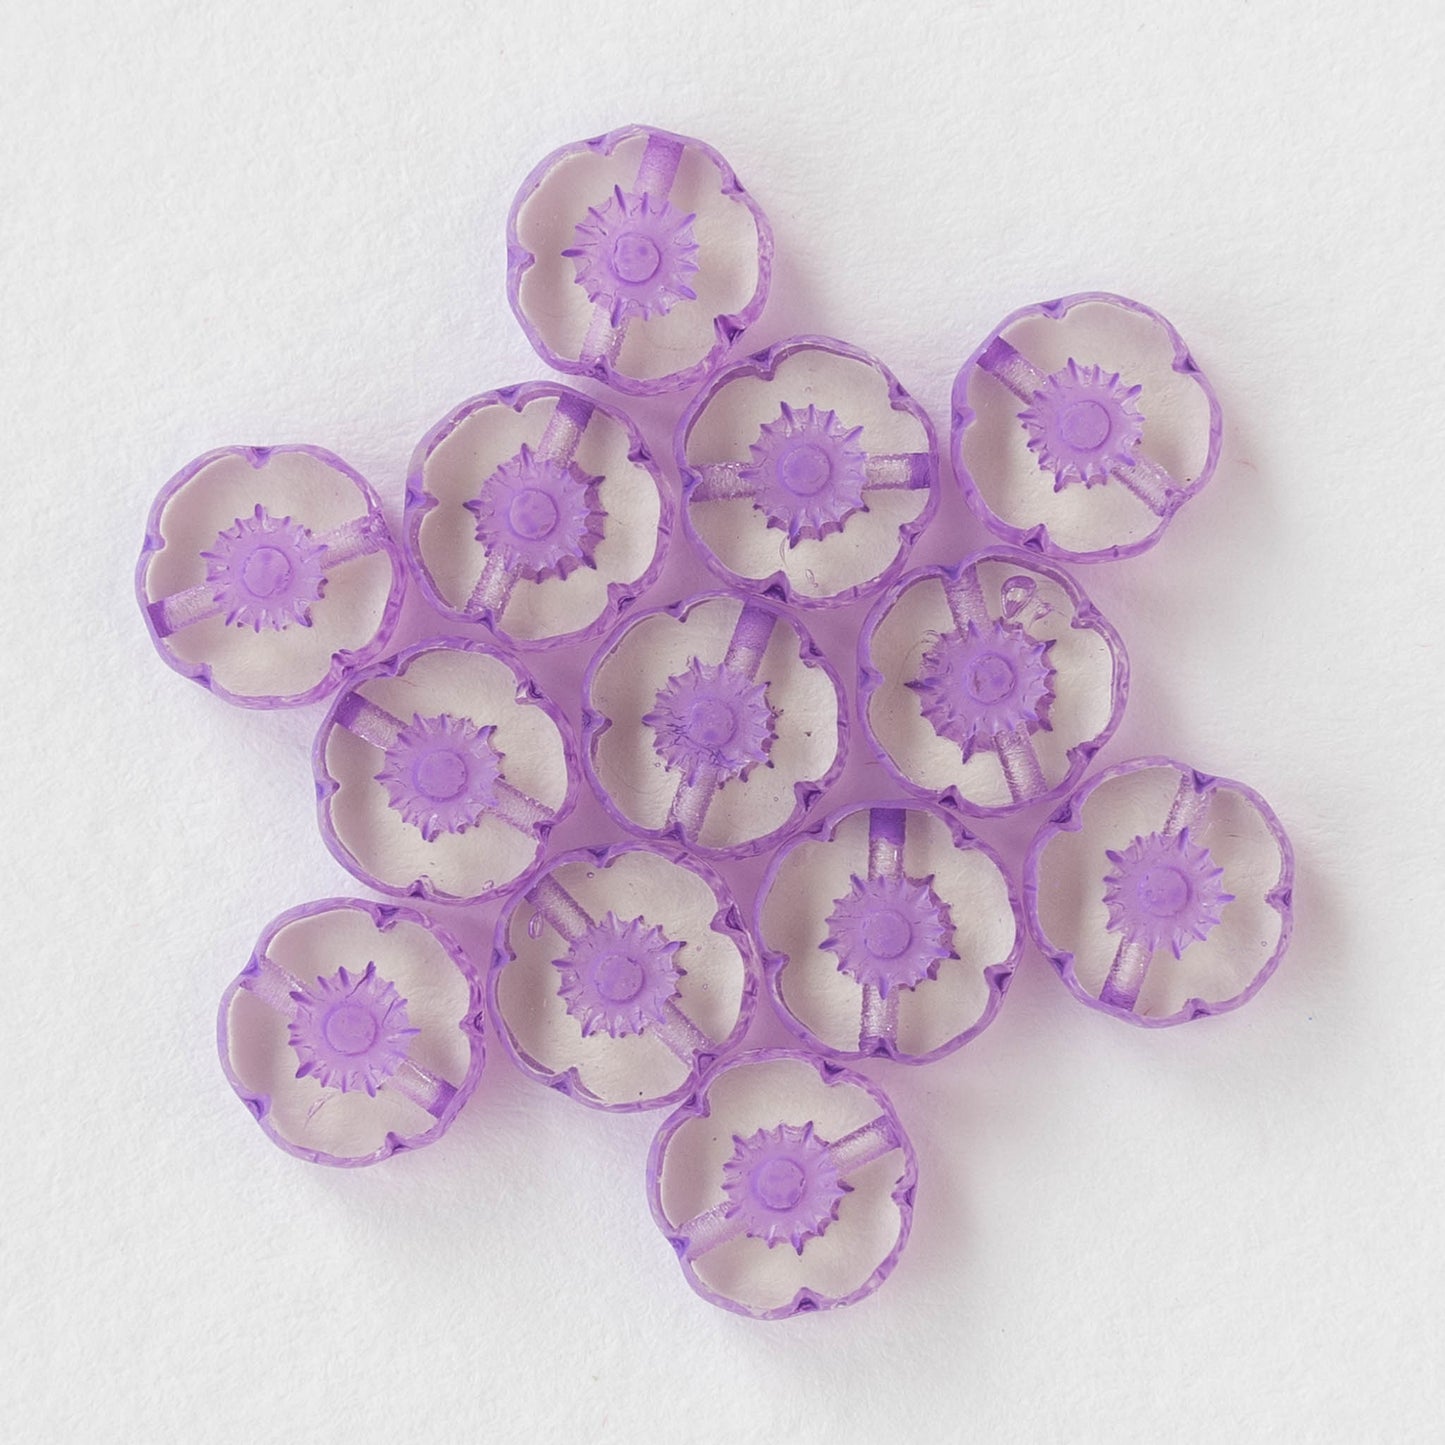 8mm Flower Beads - Crystal with Lavender -20 Beads